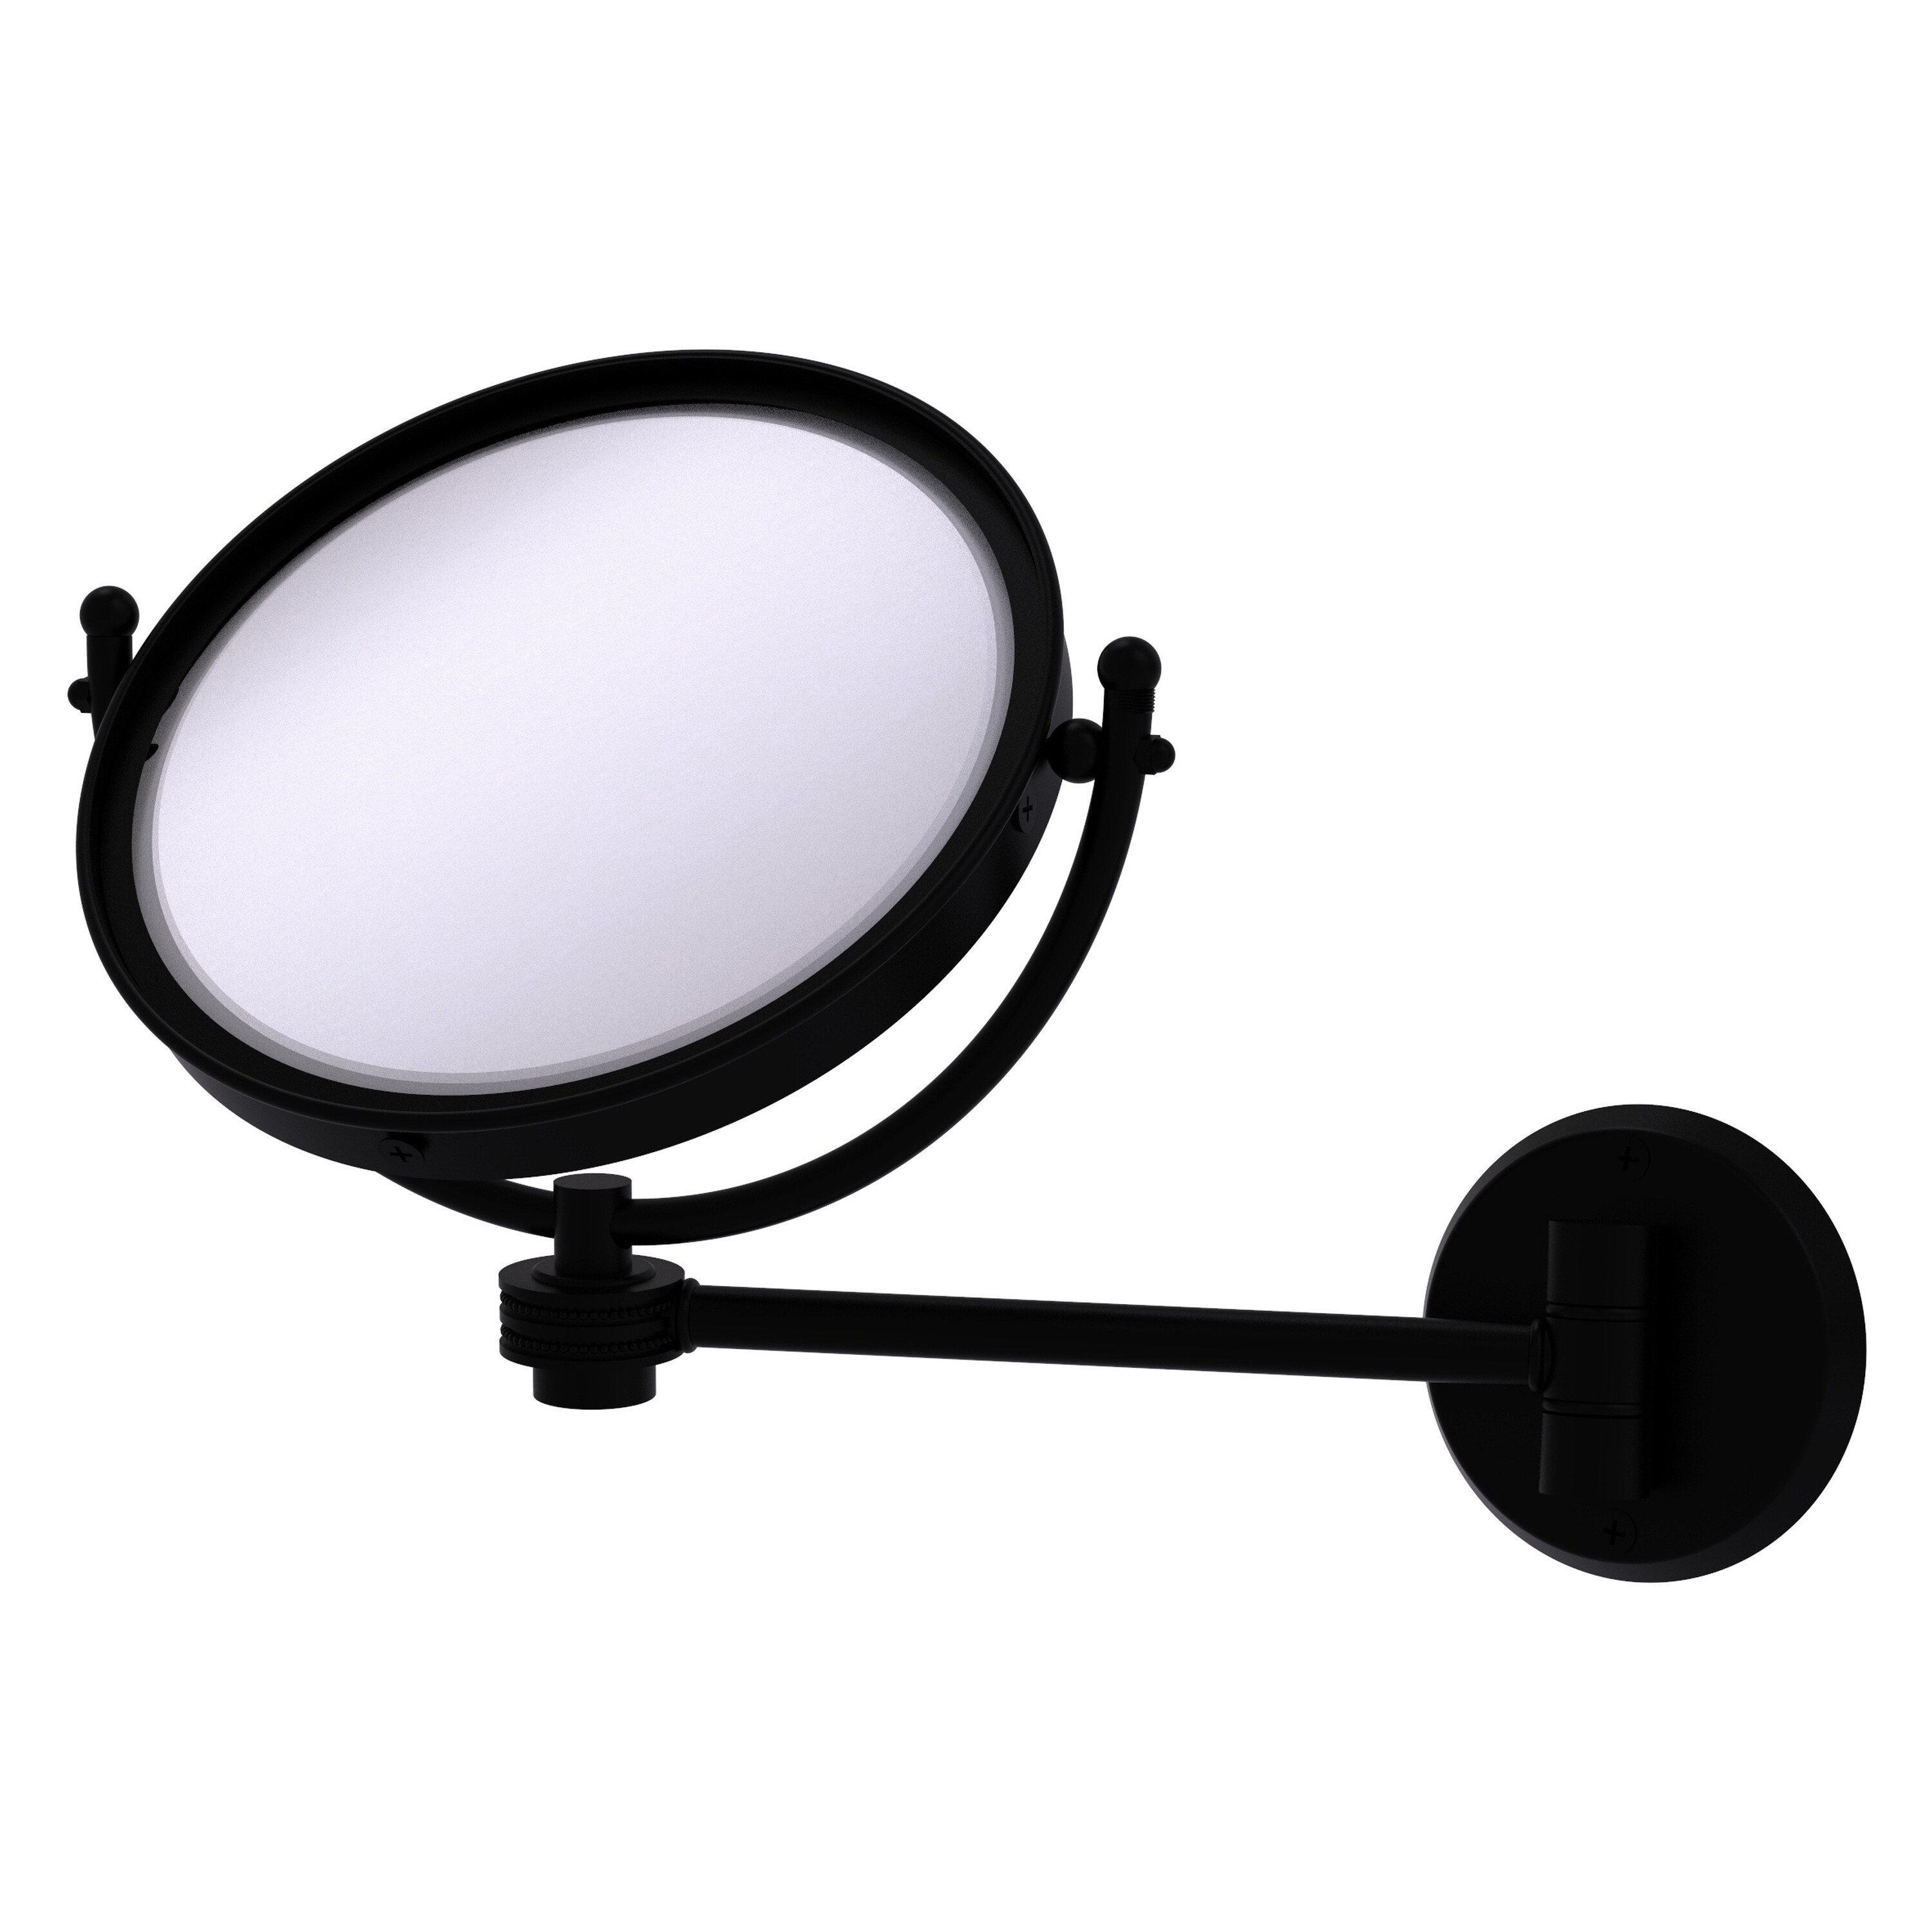 8-in x 10-in Matte Gray Double-sided 5X Magnifying Wall-mounted Vanity Mirror | - Allied Brass WM-5D/5X-BKM